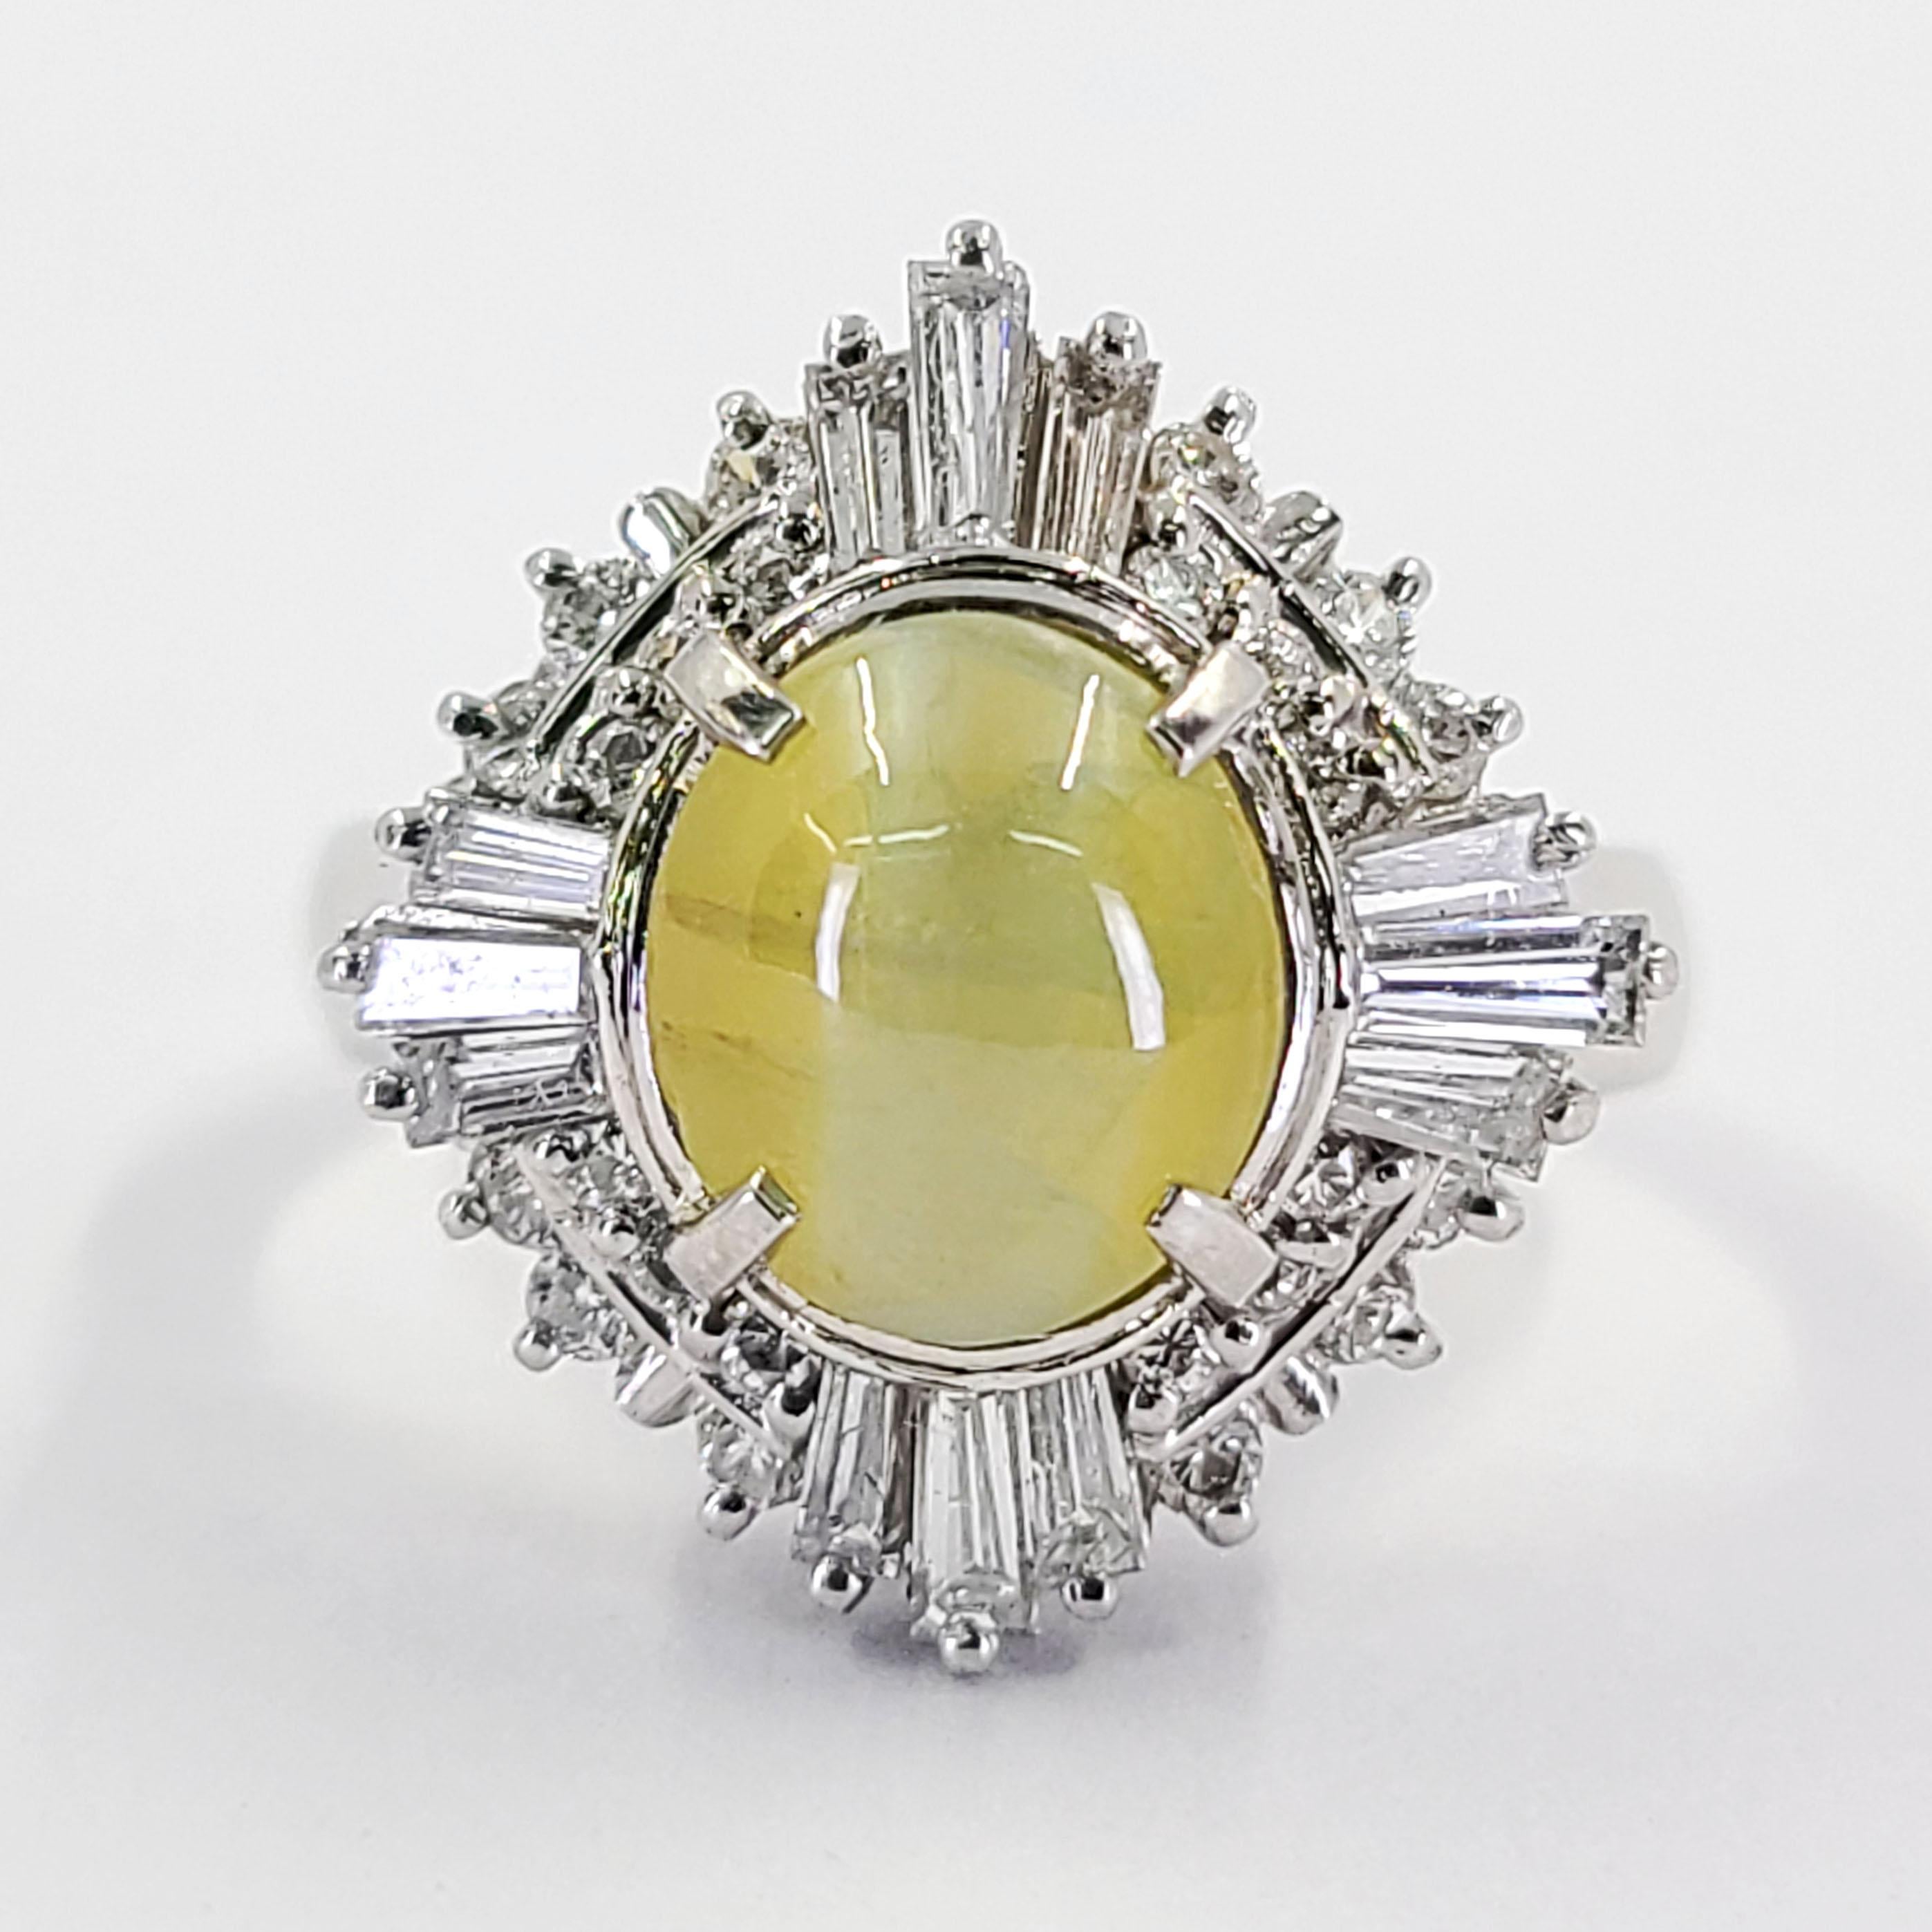 Platinum Ring Featuring A 2.45 Carat Cat's Eye (Phenomenal) Chrysoberyl Accented By 0.80 Carat Total Weight Round Brilliant and Tapered Baguette Diamonds Of VS Clarity & G/H Color. Finger Size 6; Purchase Includes One Sizing Service Prior To